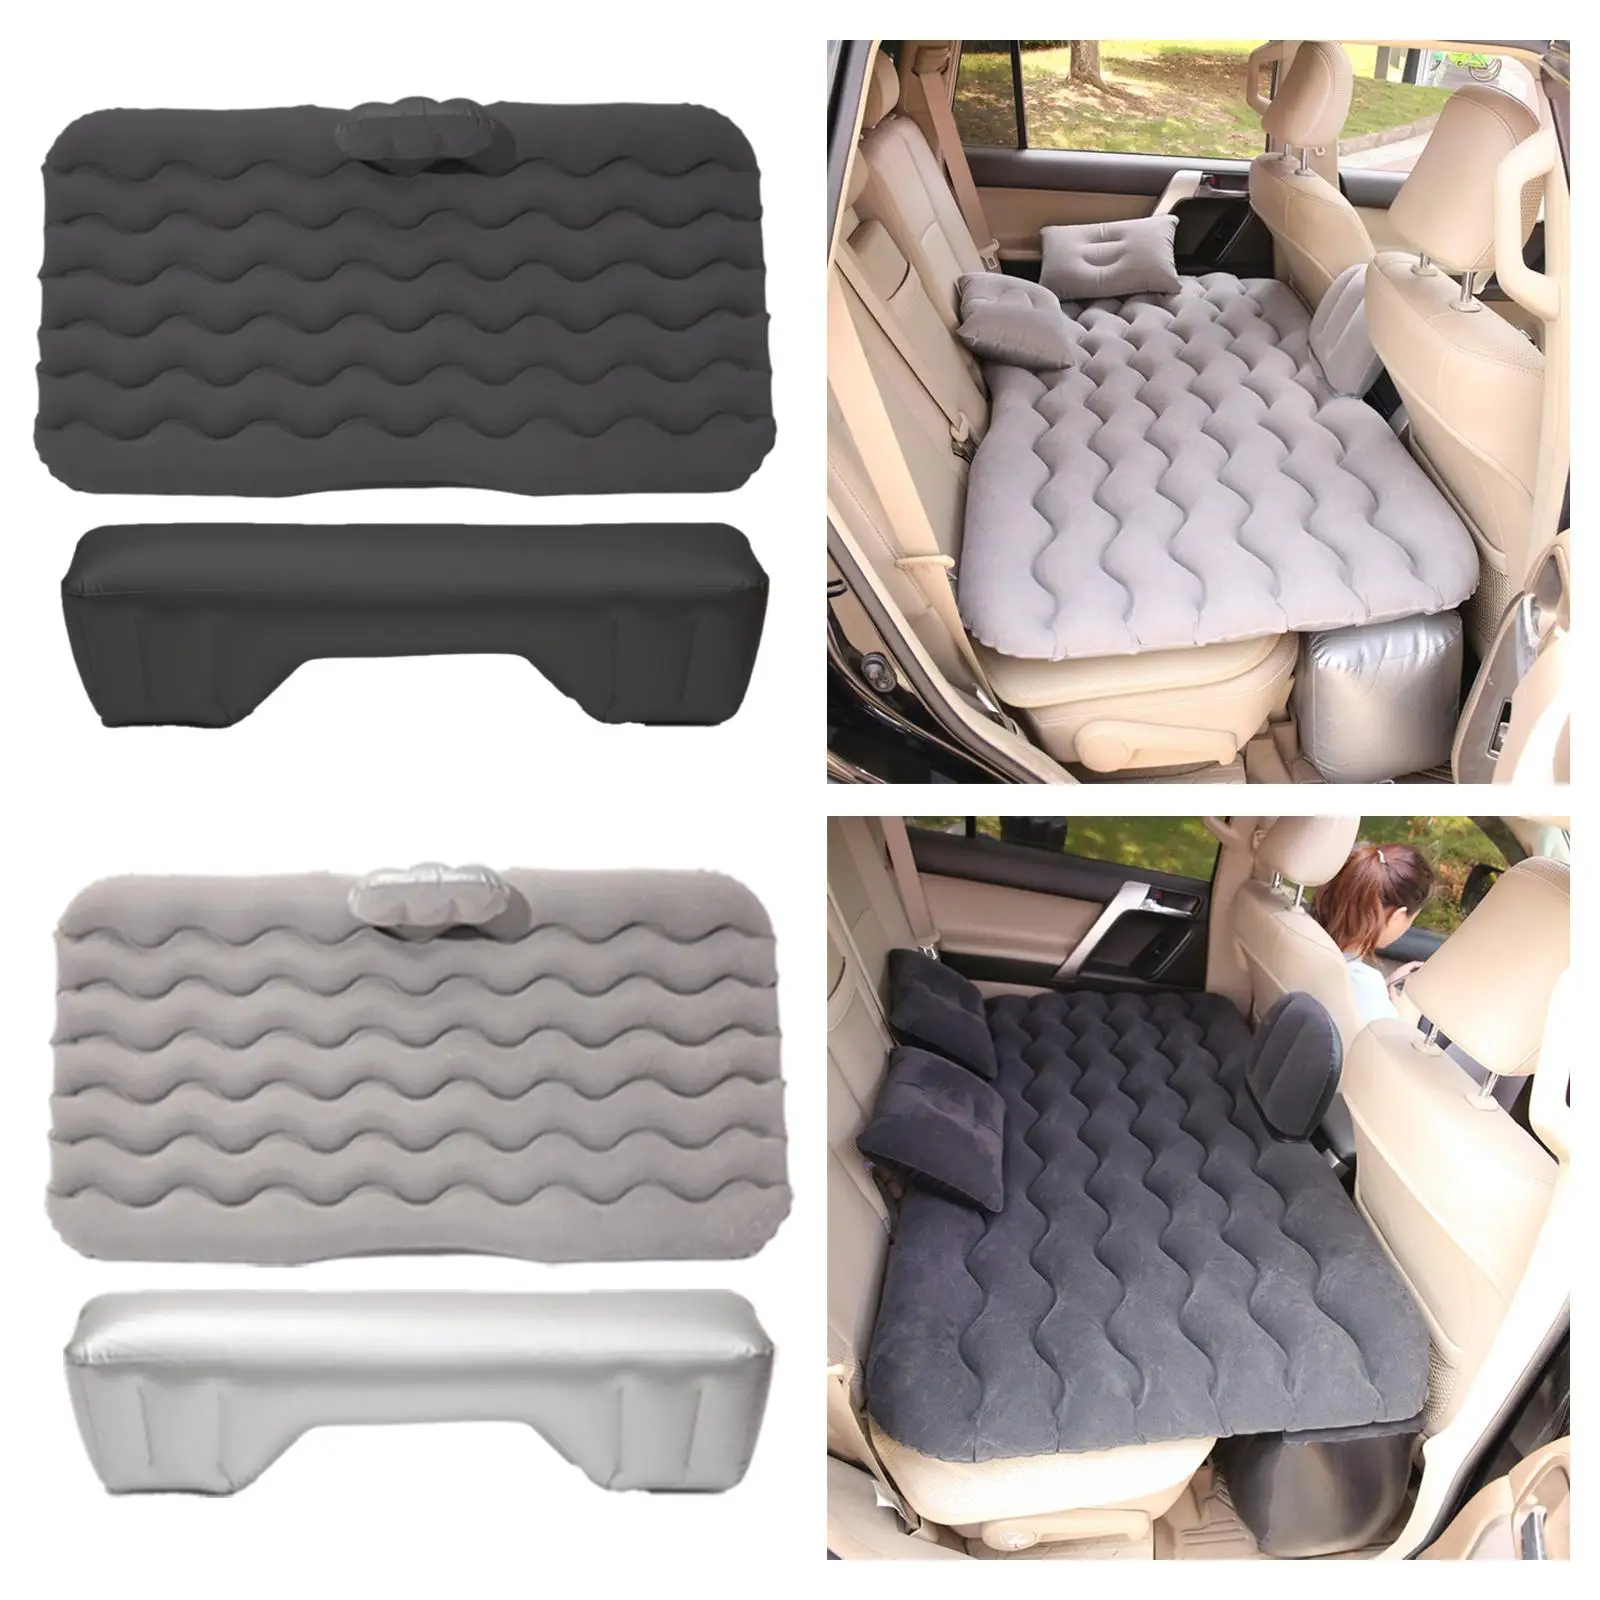 Back Seat Air Mattress Pad Inflatable Rest Cushion Bed Mat Outdoor SUV Tent